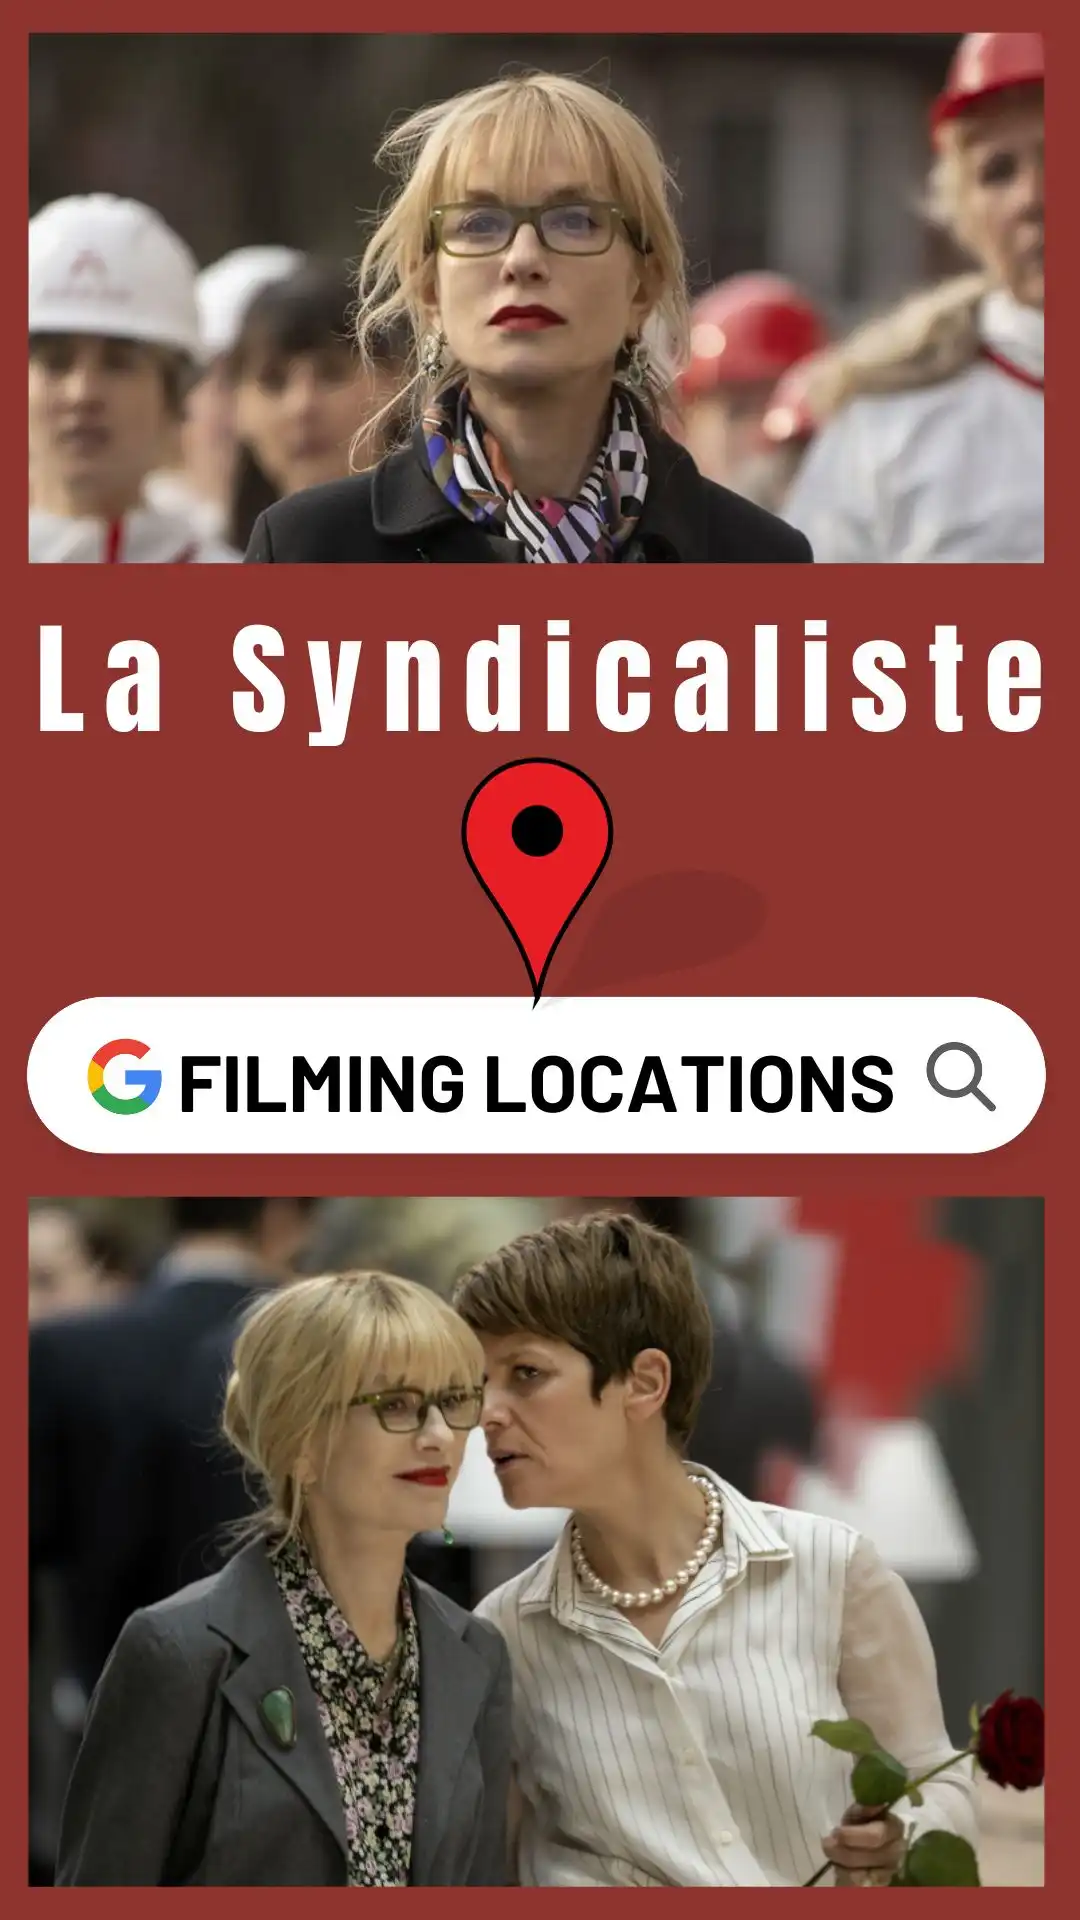 La Syndicaliste Filming Locations